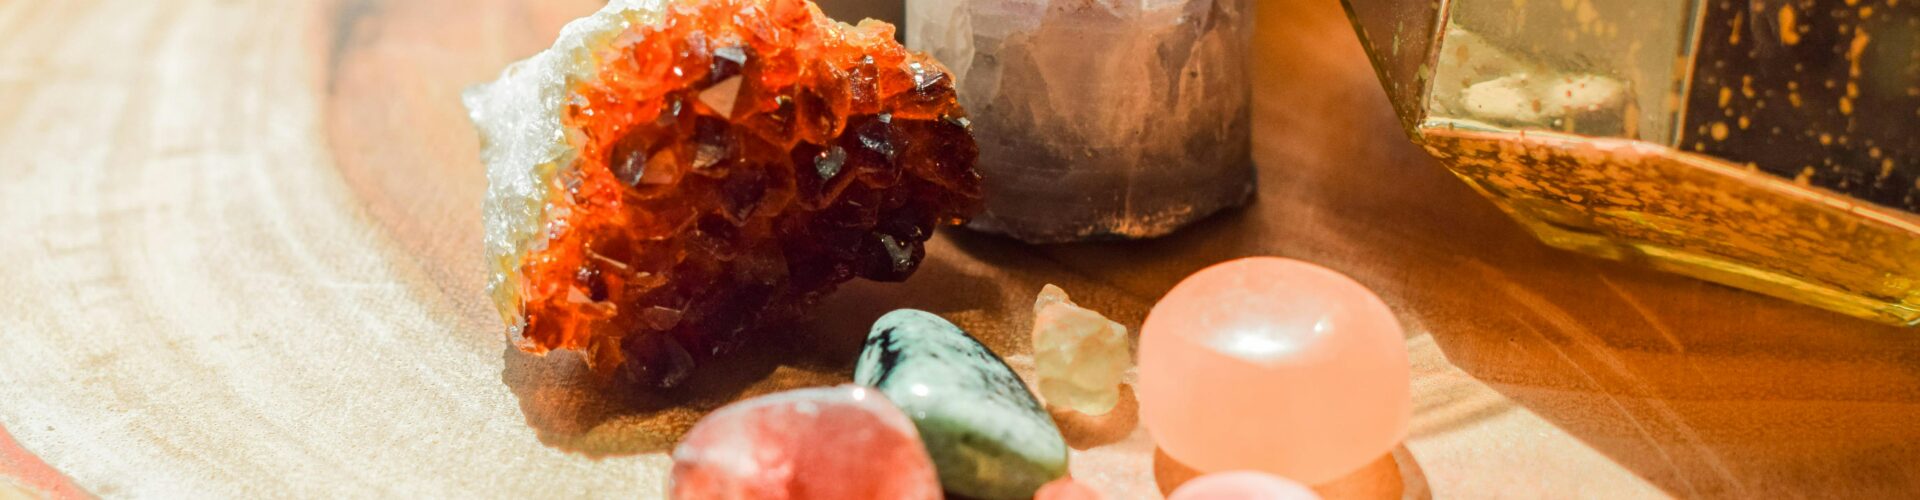 healing crystals for yoga